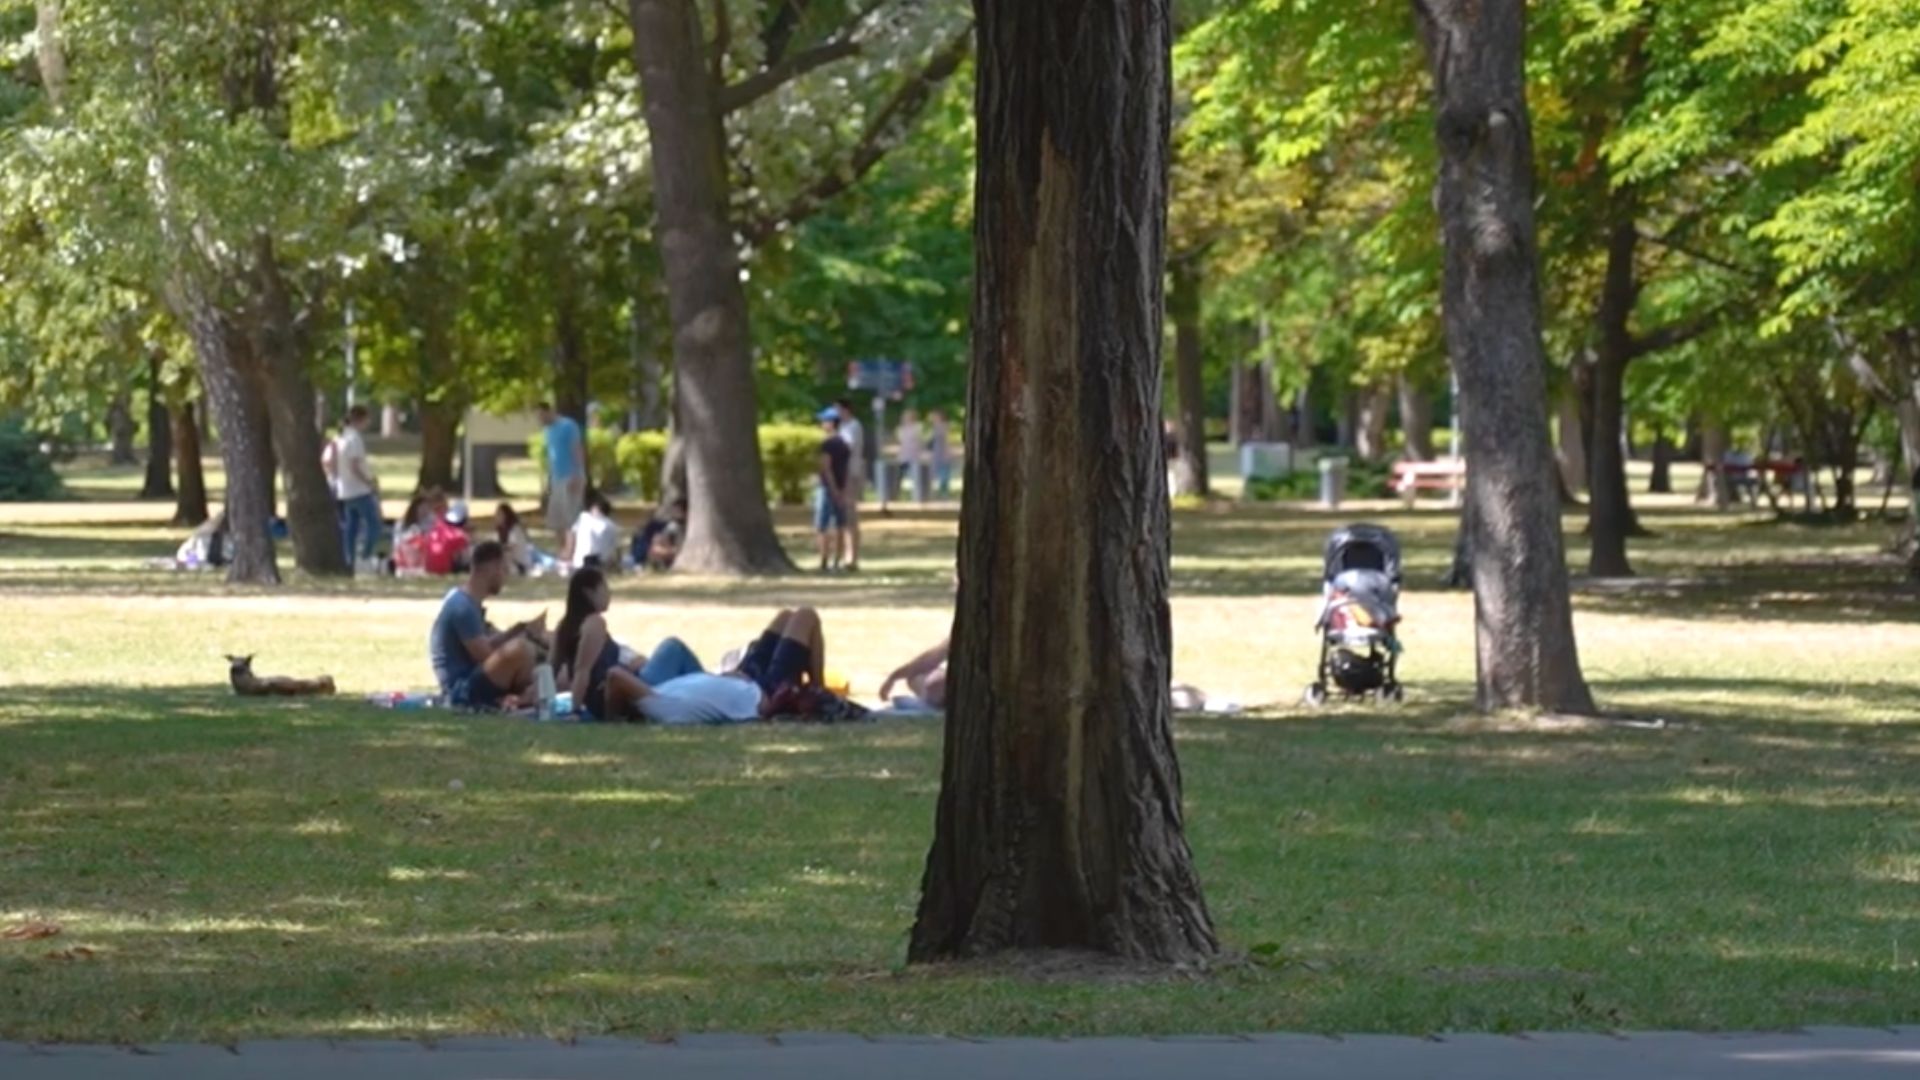 People relaxing and having a picnic in a green park on Margaret Island in Budapest, with trees and a stroller in the background.